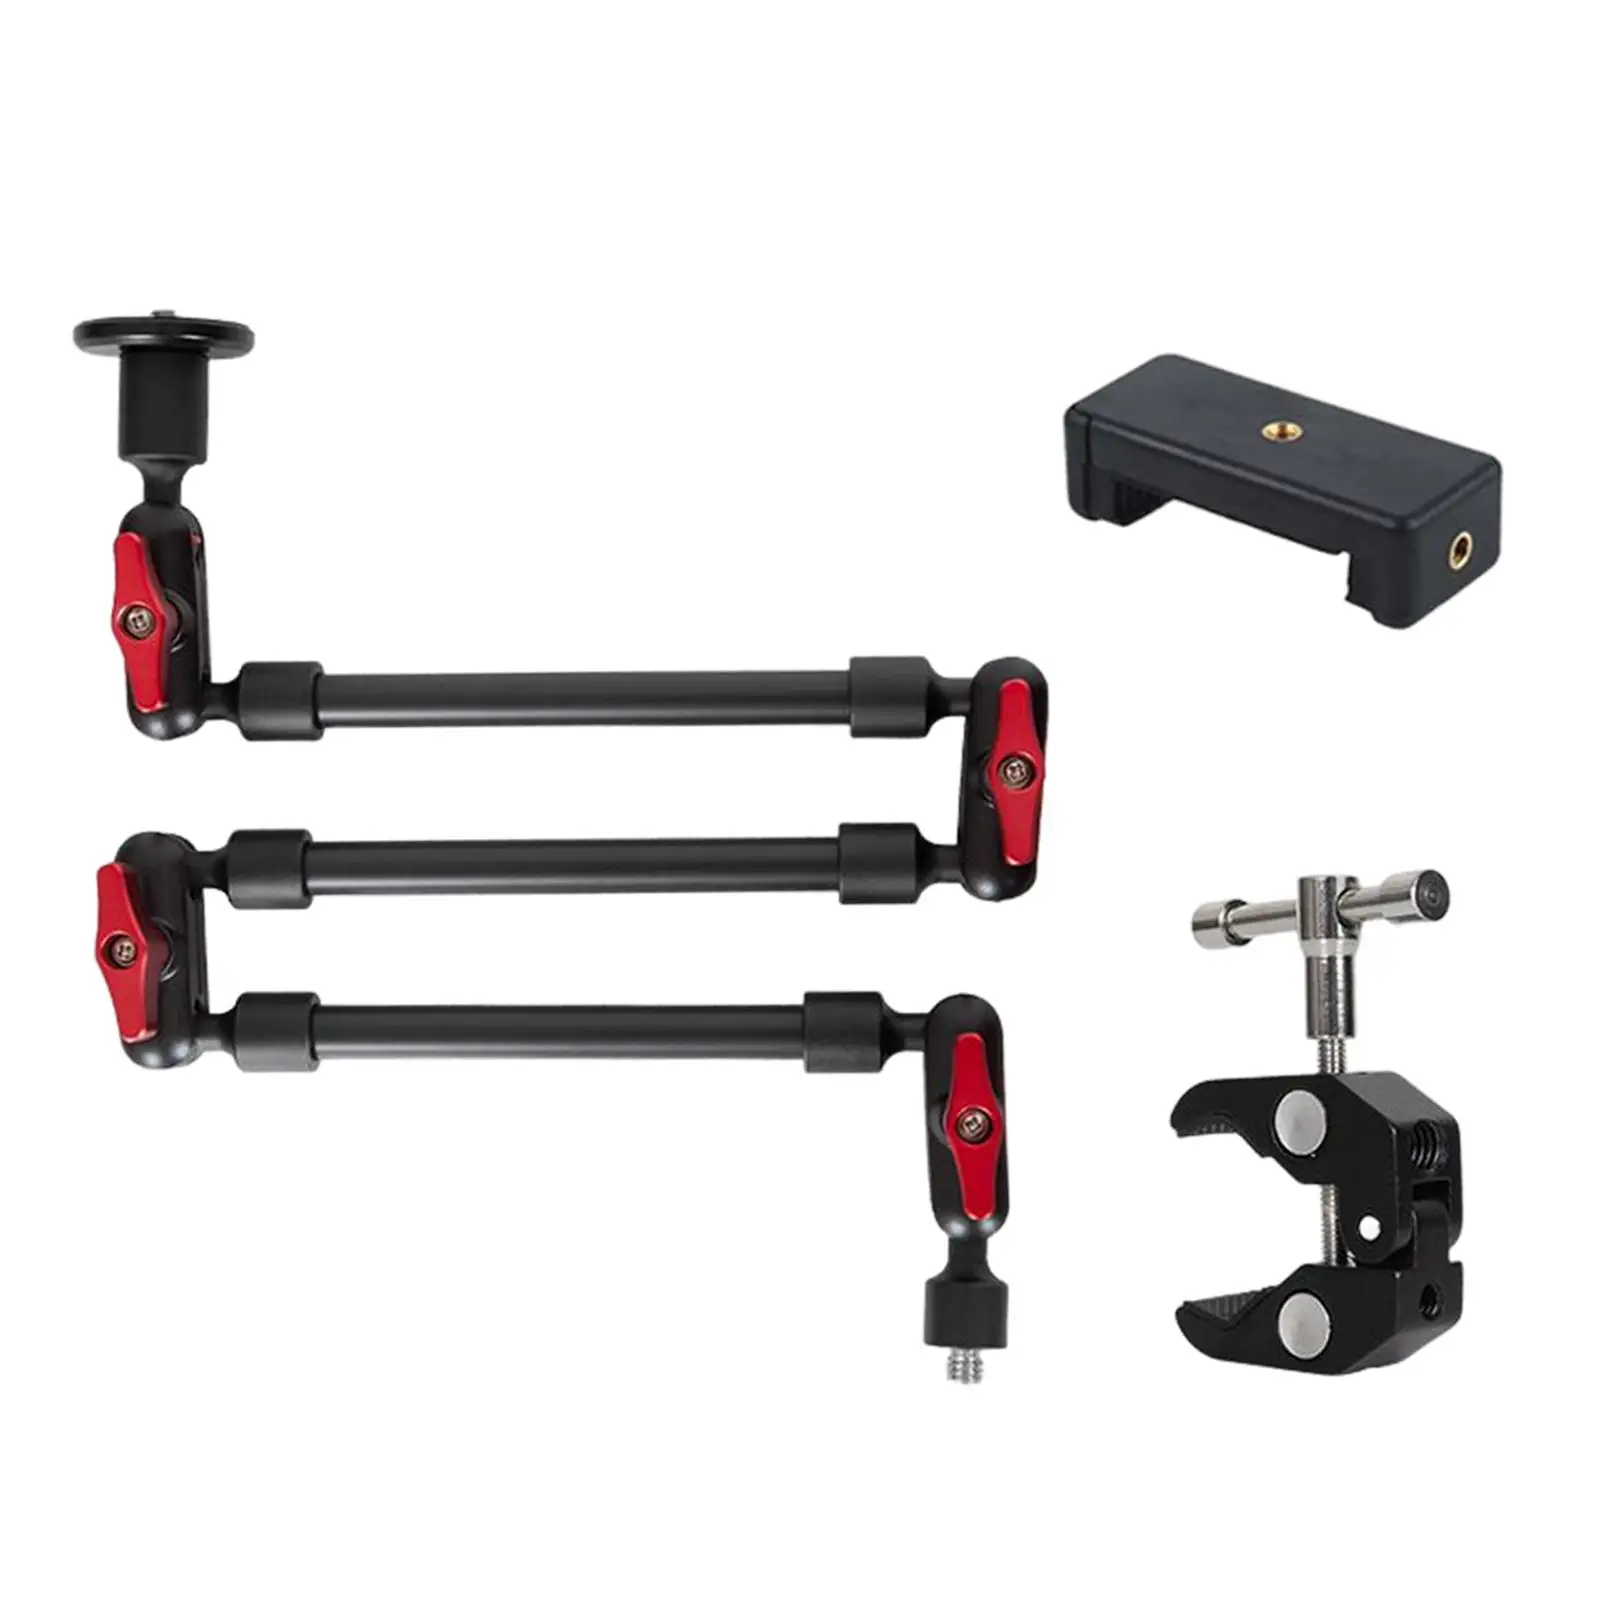 

Flexible Arm Mounts with 1/4inch and 3/8inch Thread Aluminum Alloy Magic Friction Arms for DSLR Camera Video Live Streaming